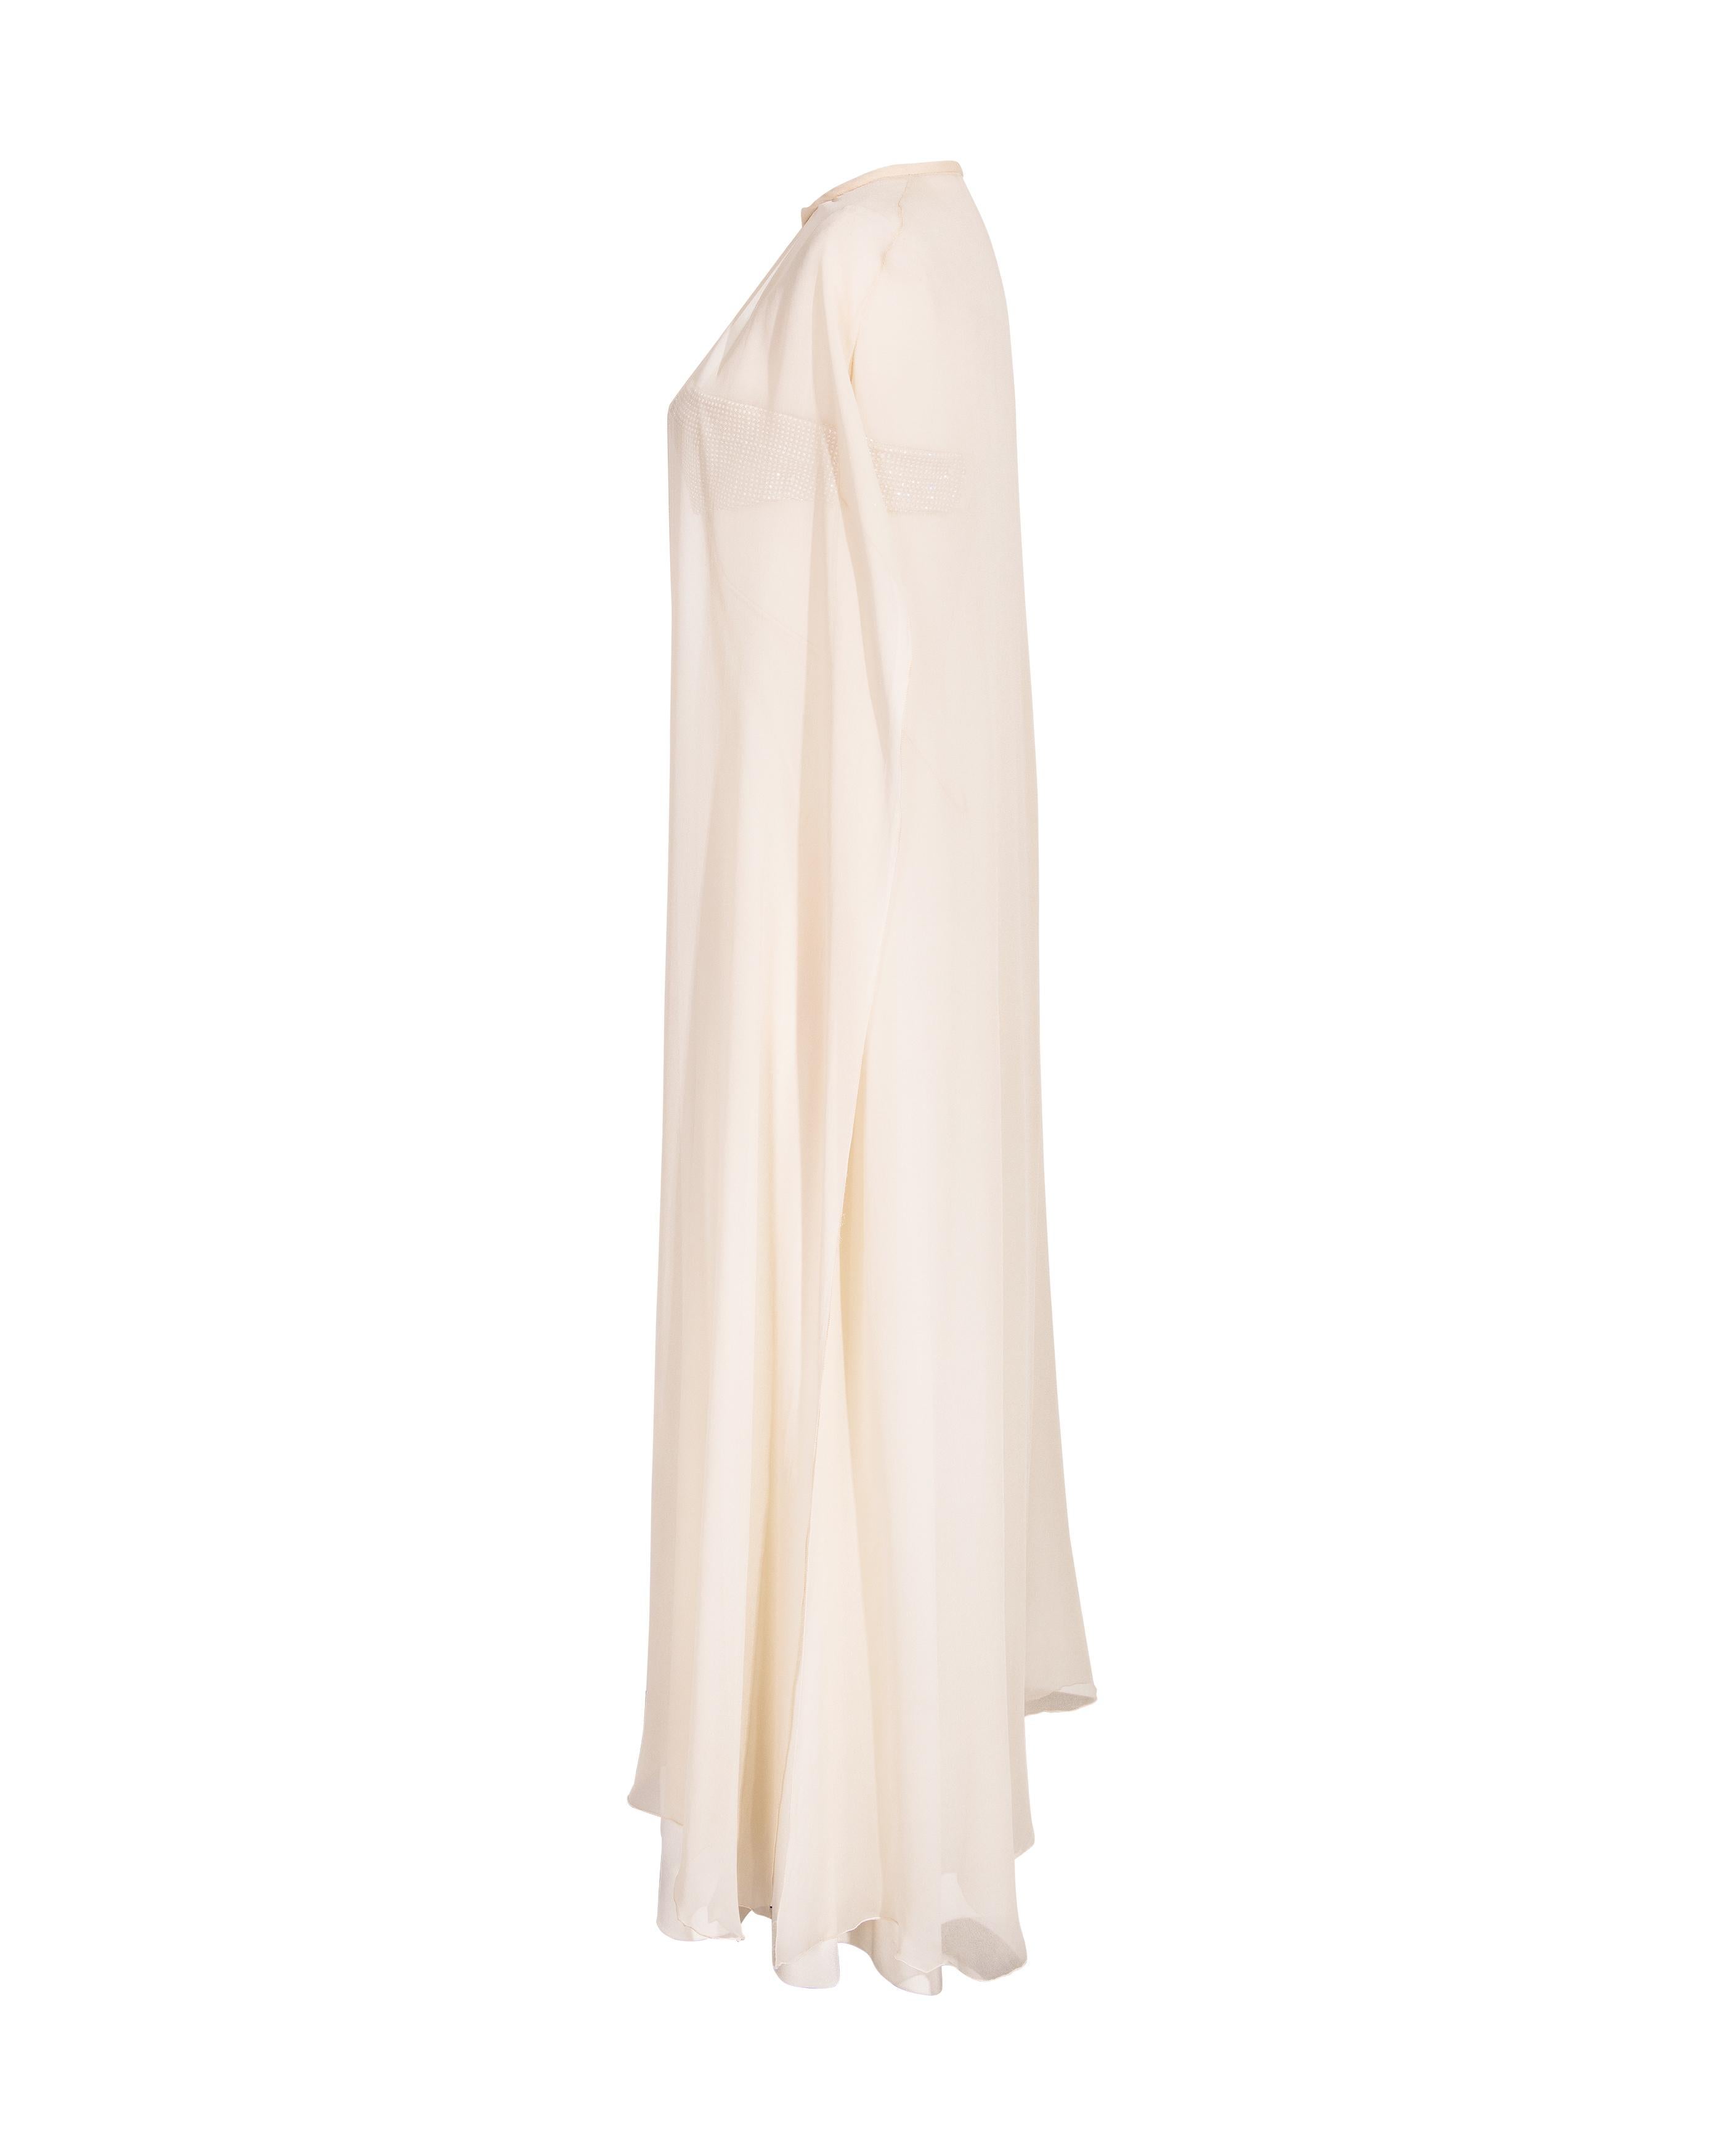 1978 Loris Azzaro White Gown with Crystal Cutout Bodice 3